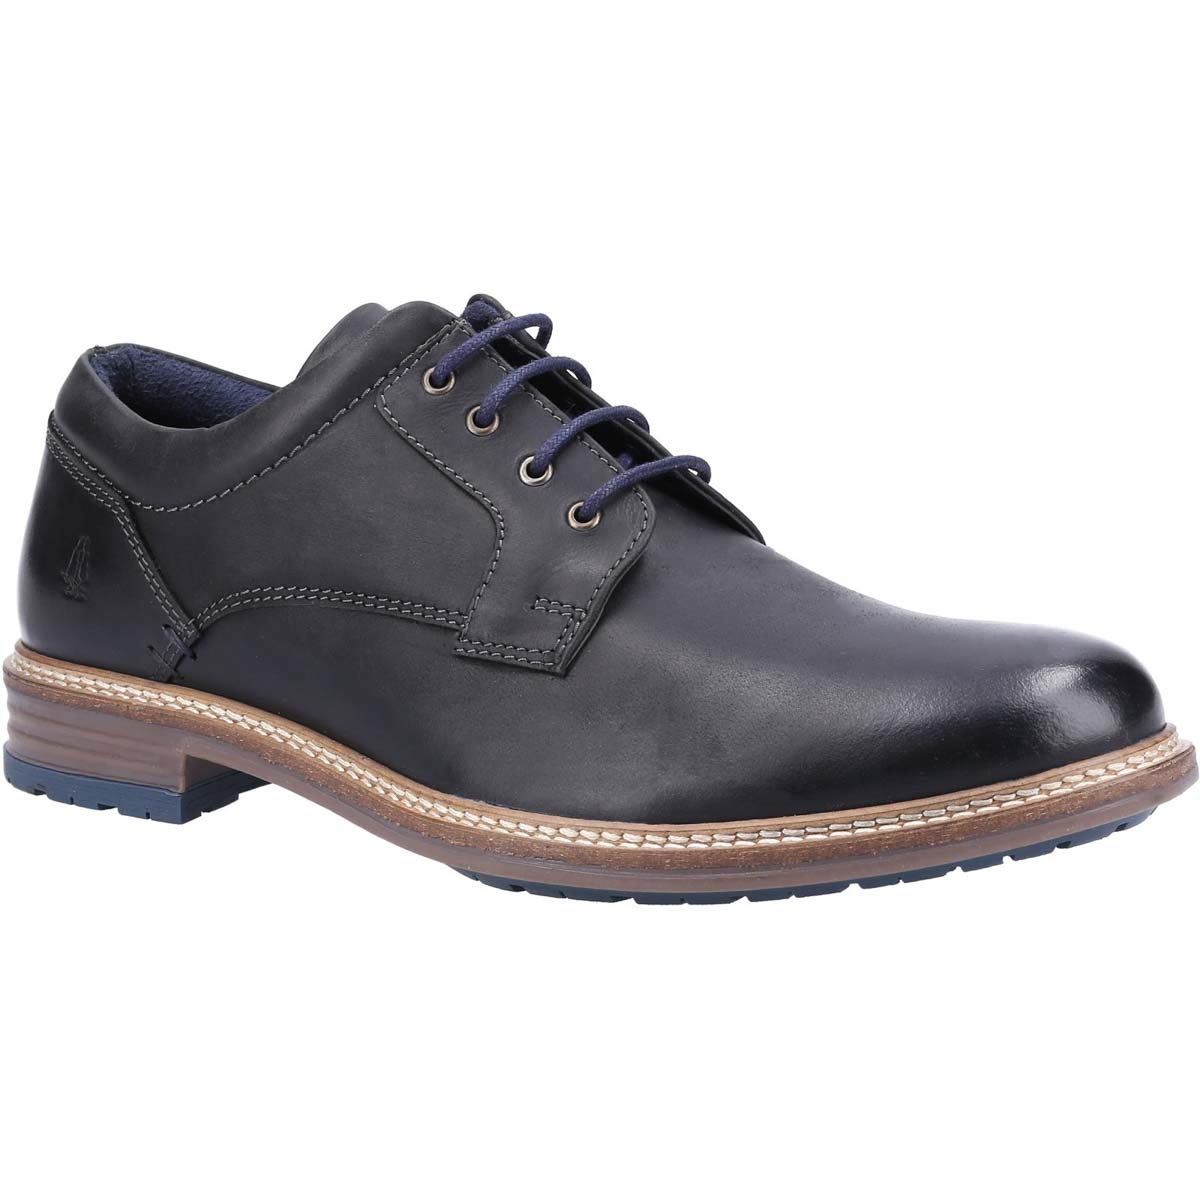 Hush Puppies Julian Lace Up Black Mens formal shoes 35650-66502 in a Plain Leather in Size 11